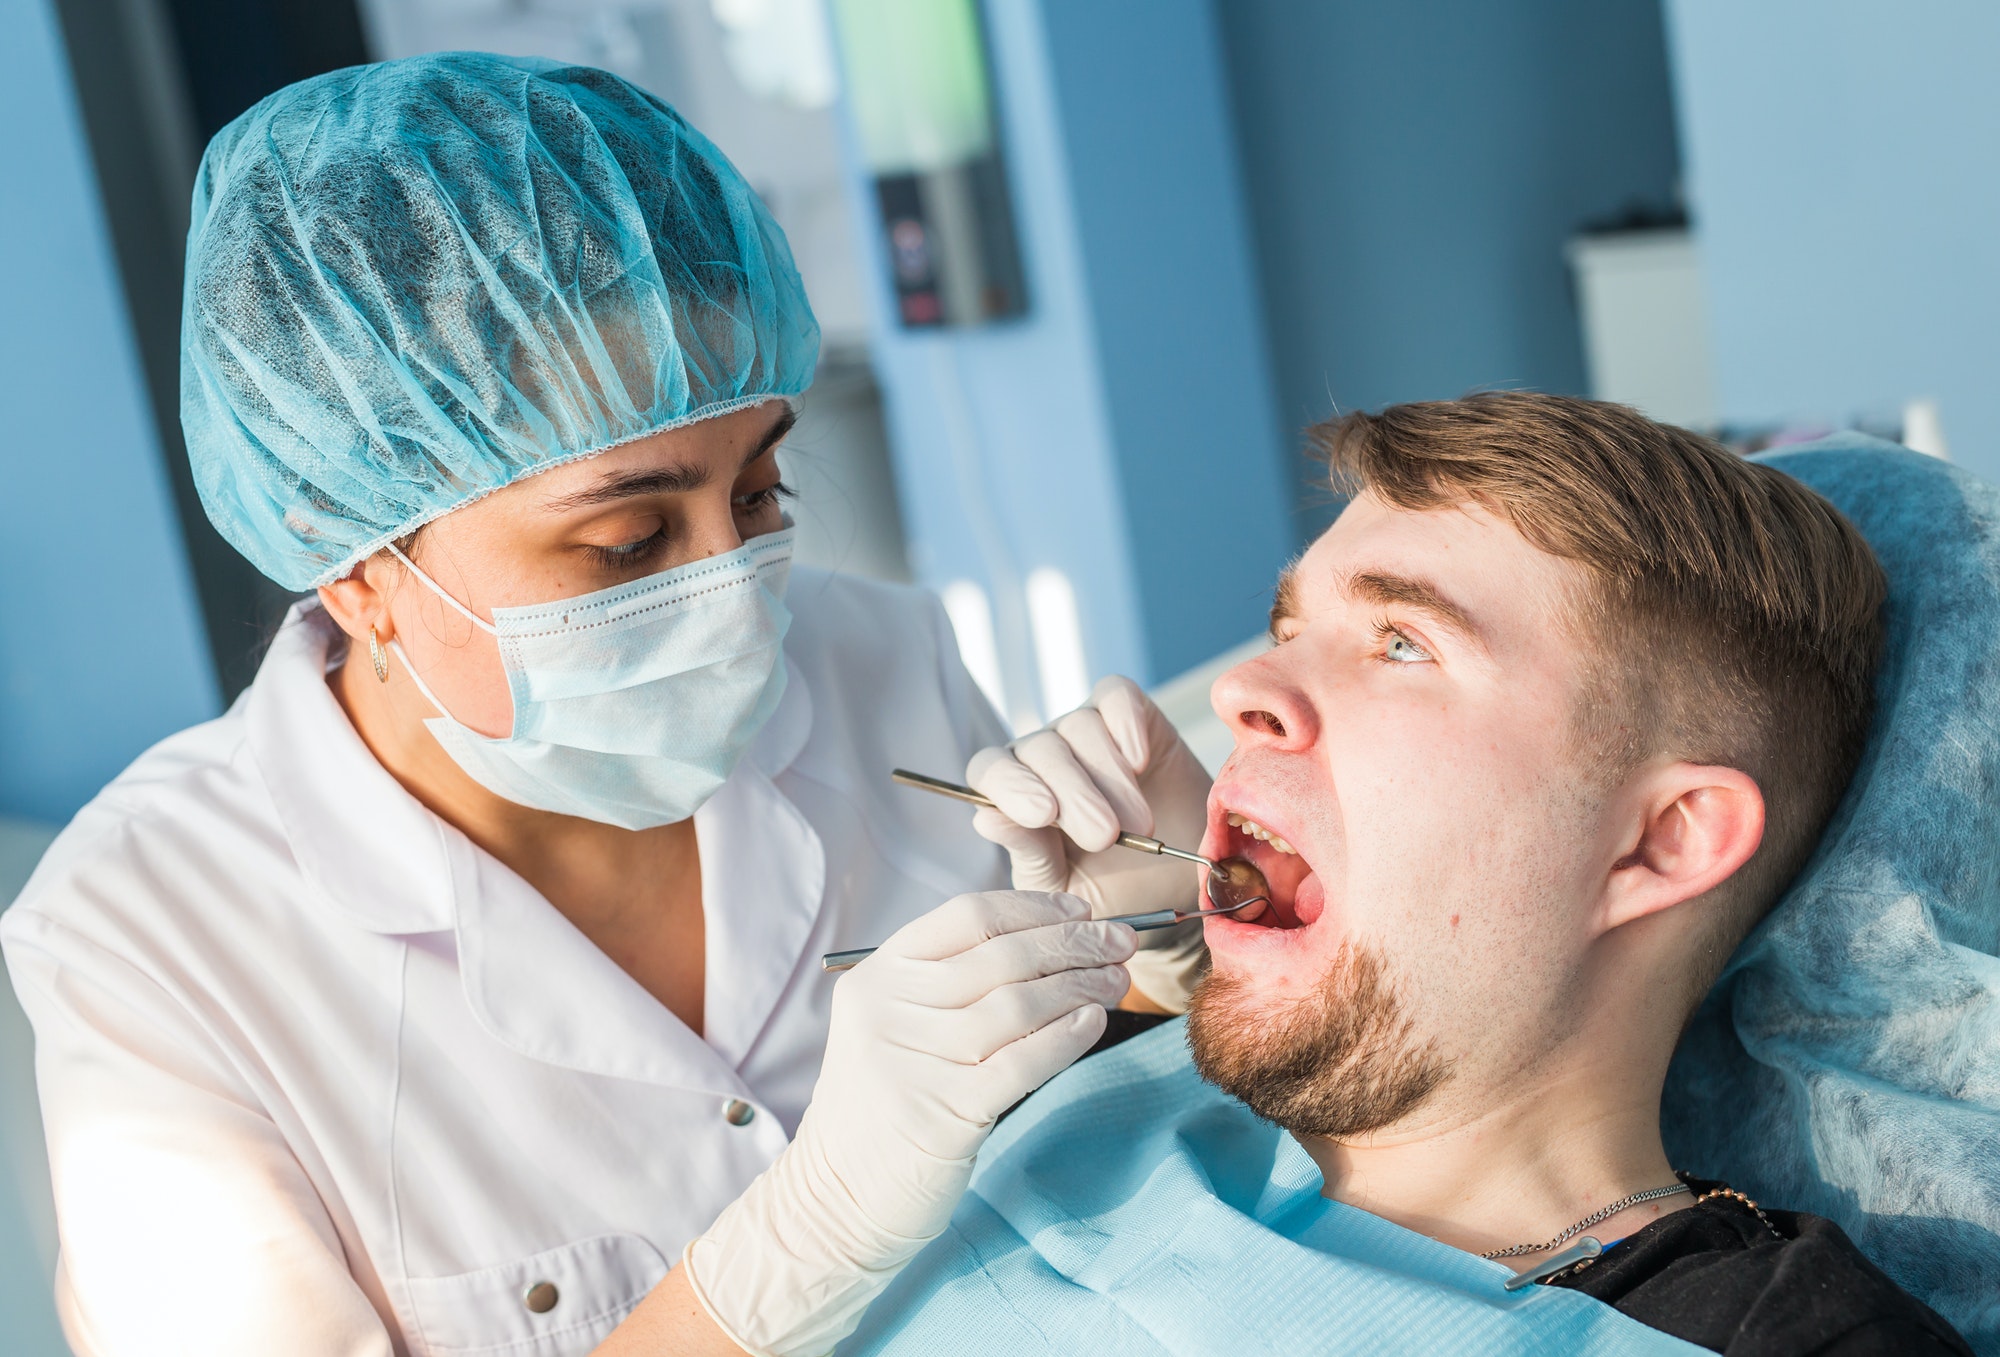 Overview of dental caries prevention. man at the dentist's chair during a dental procedure